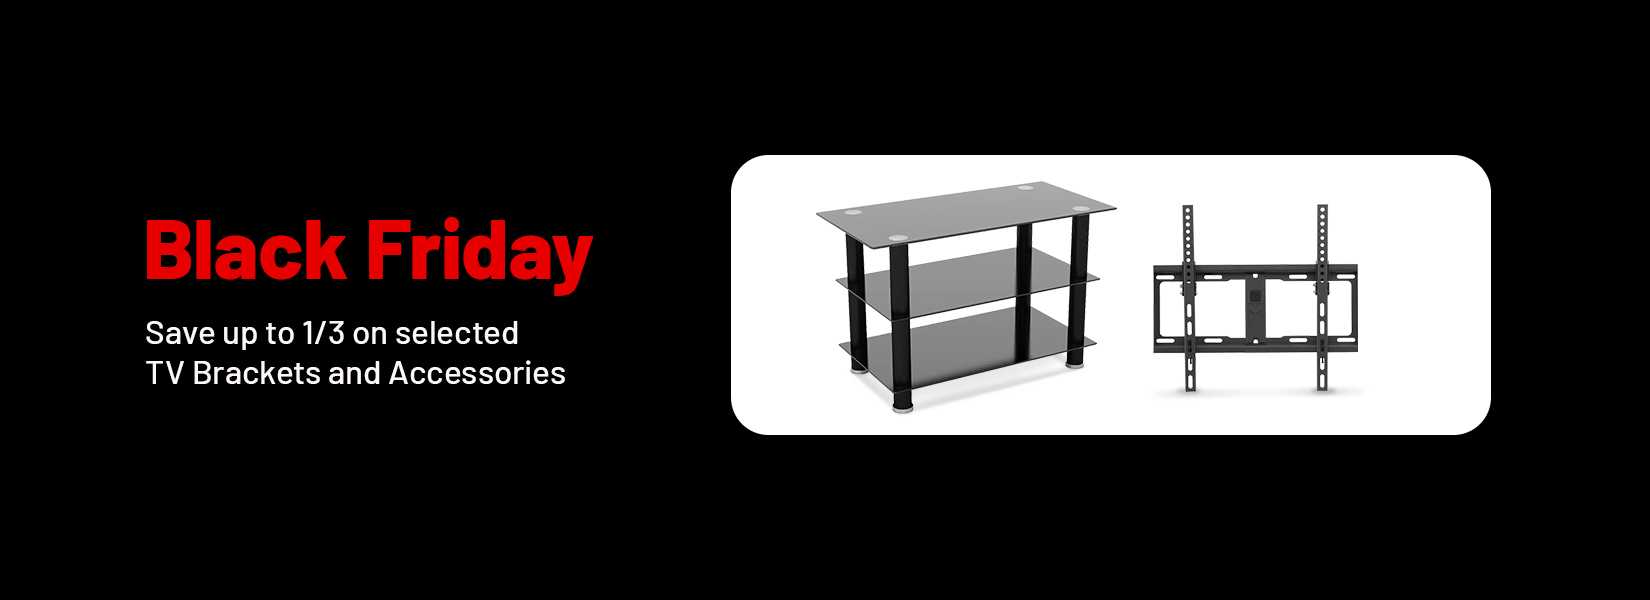 Black Friday. Save up to 1/3 on selected TV brackets and accessories.